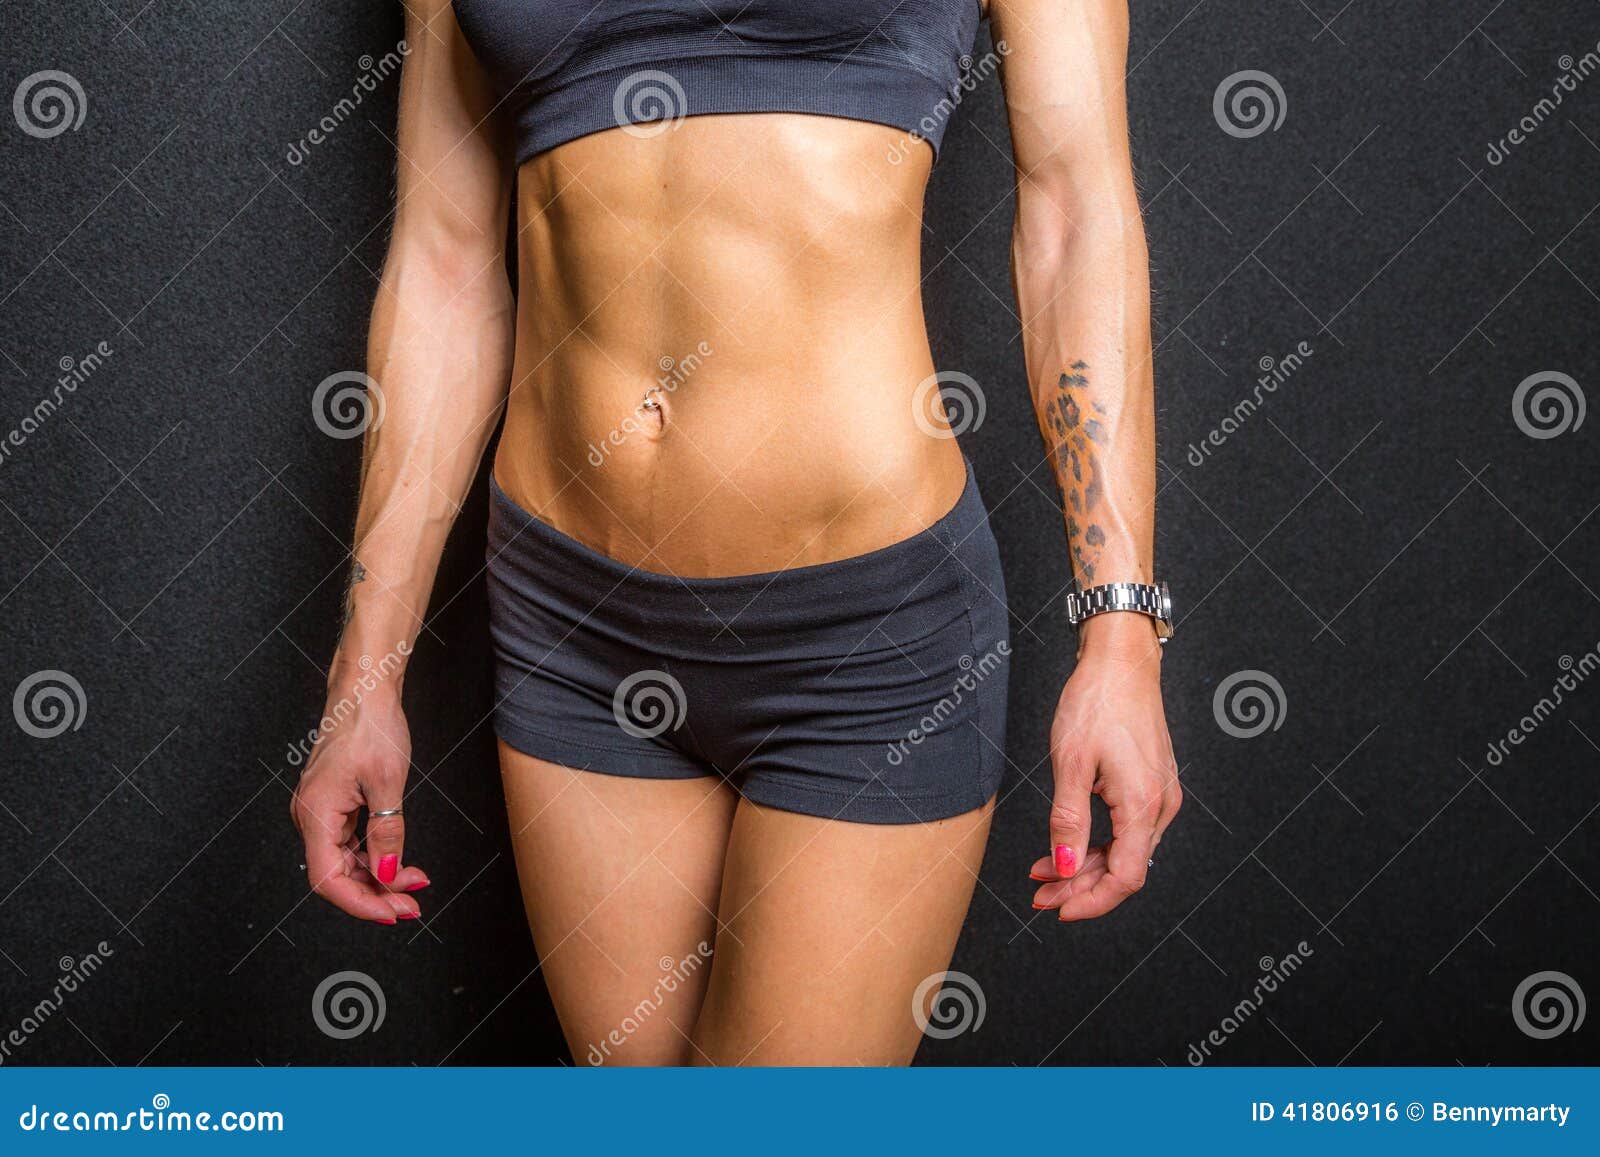 https://thumbs.dreamstime.com/z/female-abs-abdominal-muscles-black-background-41806916.jpg